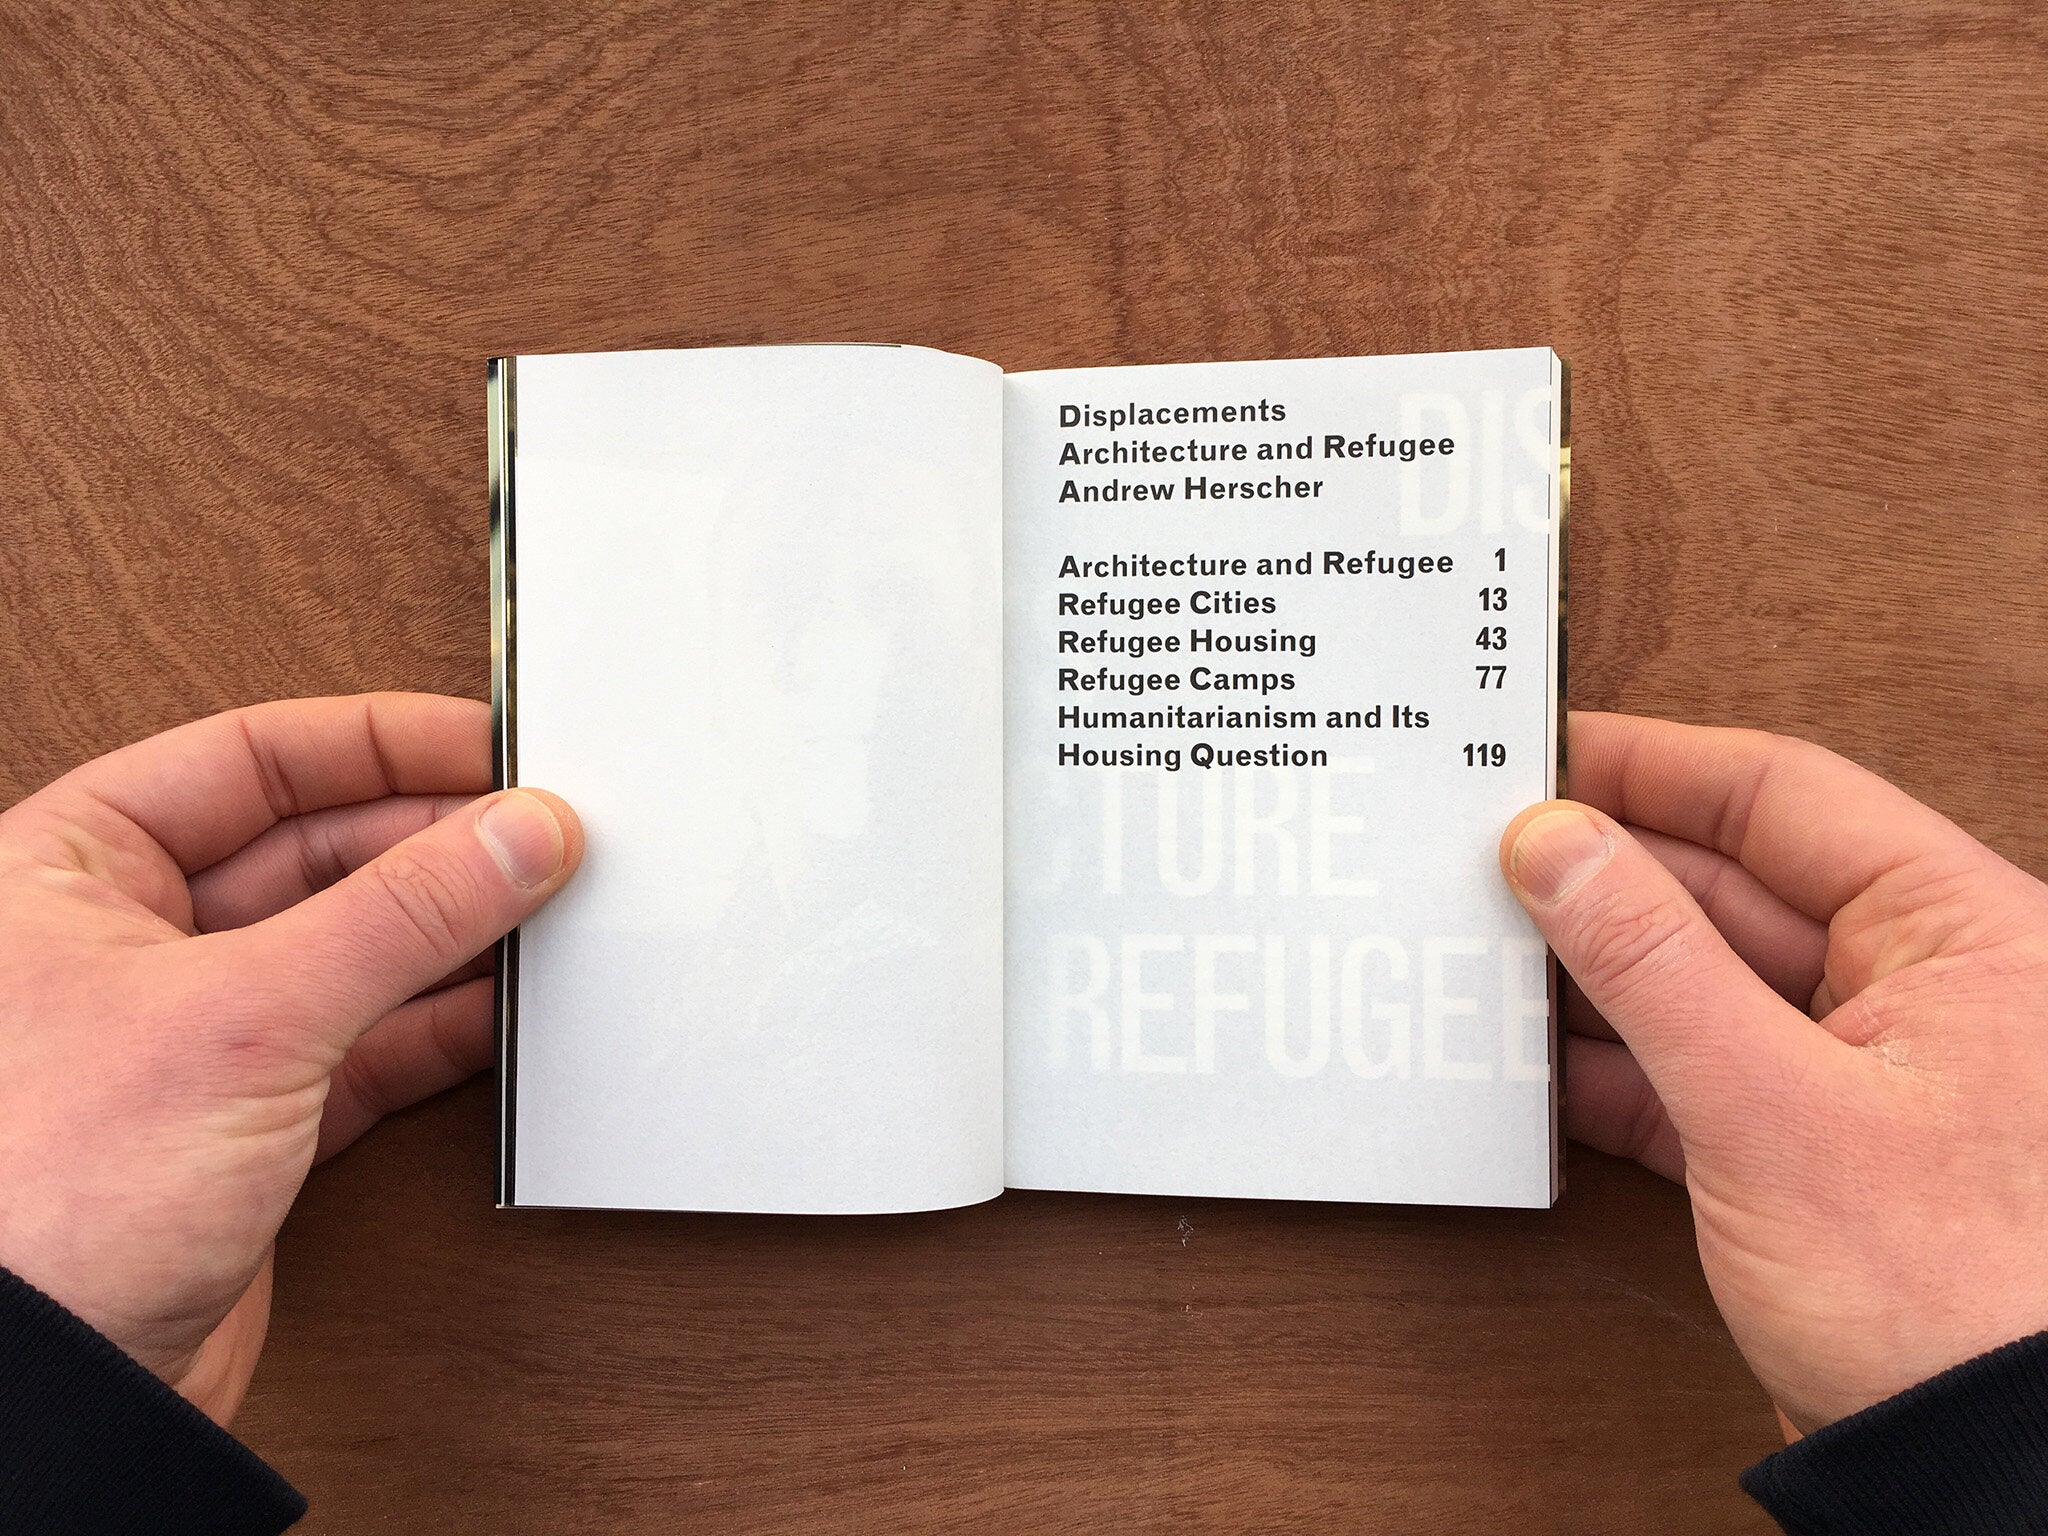 DISPLACEMENTS: ARCHITECTURE AND REFUGEE by Andrew Herscher